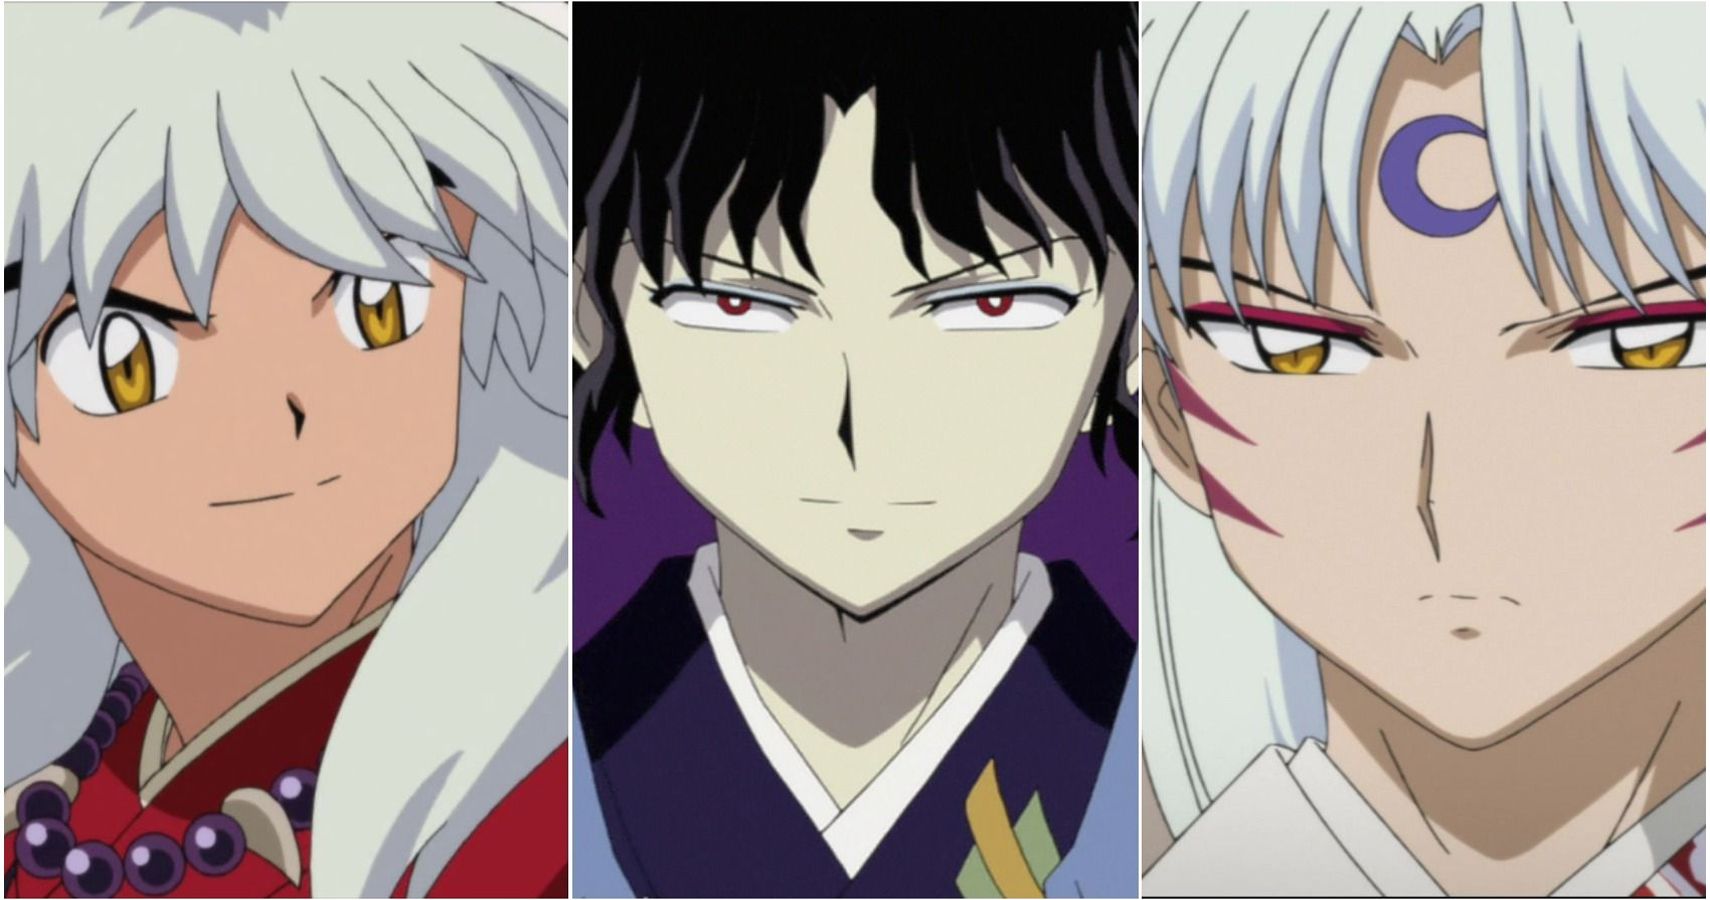 InuYasha: The Complete Anime and Movies Watching Order